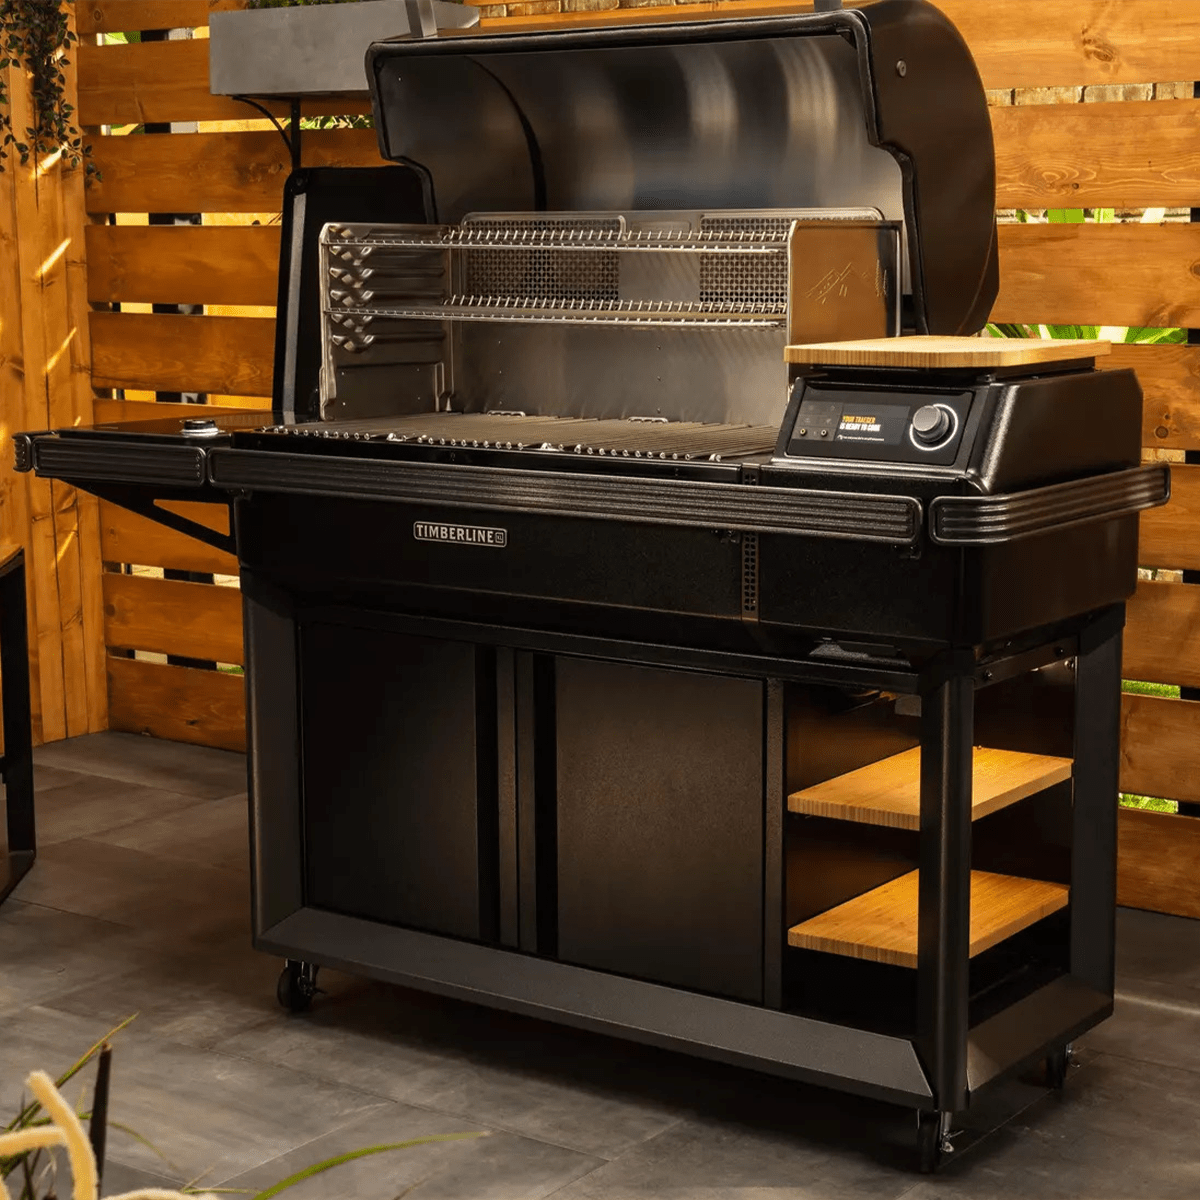 New Traeger Timberline Pellet Grill Review 2022: Is Smoker Worth It?